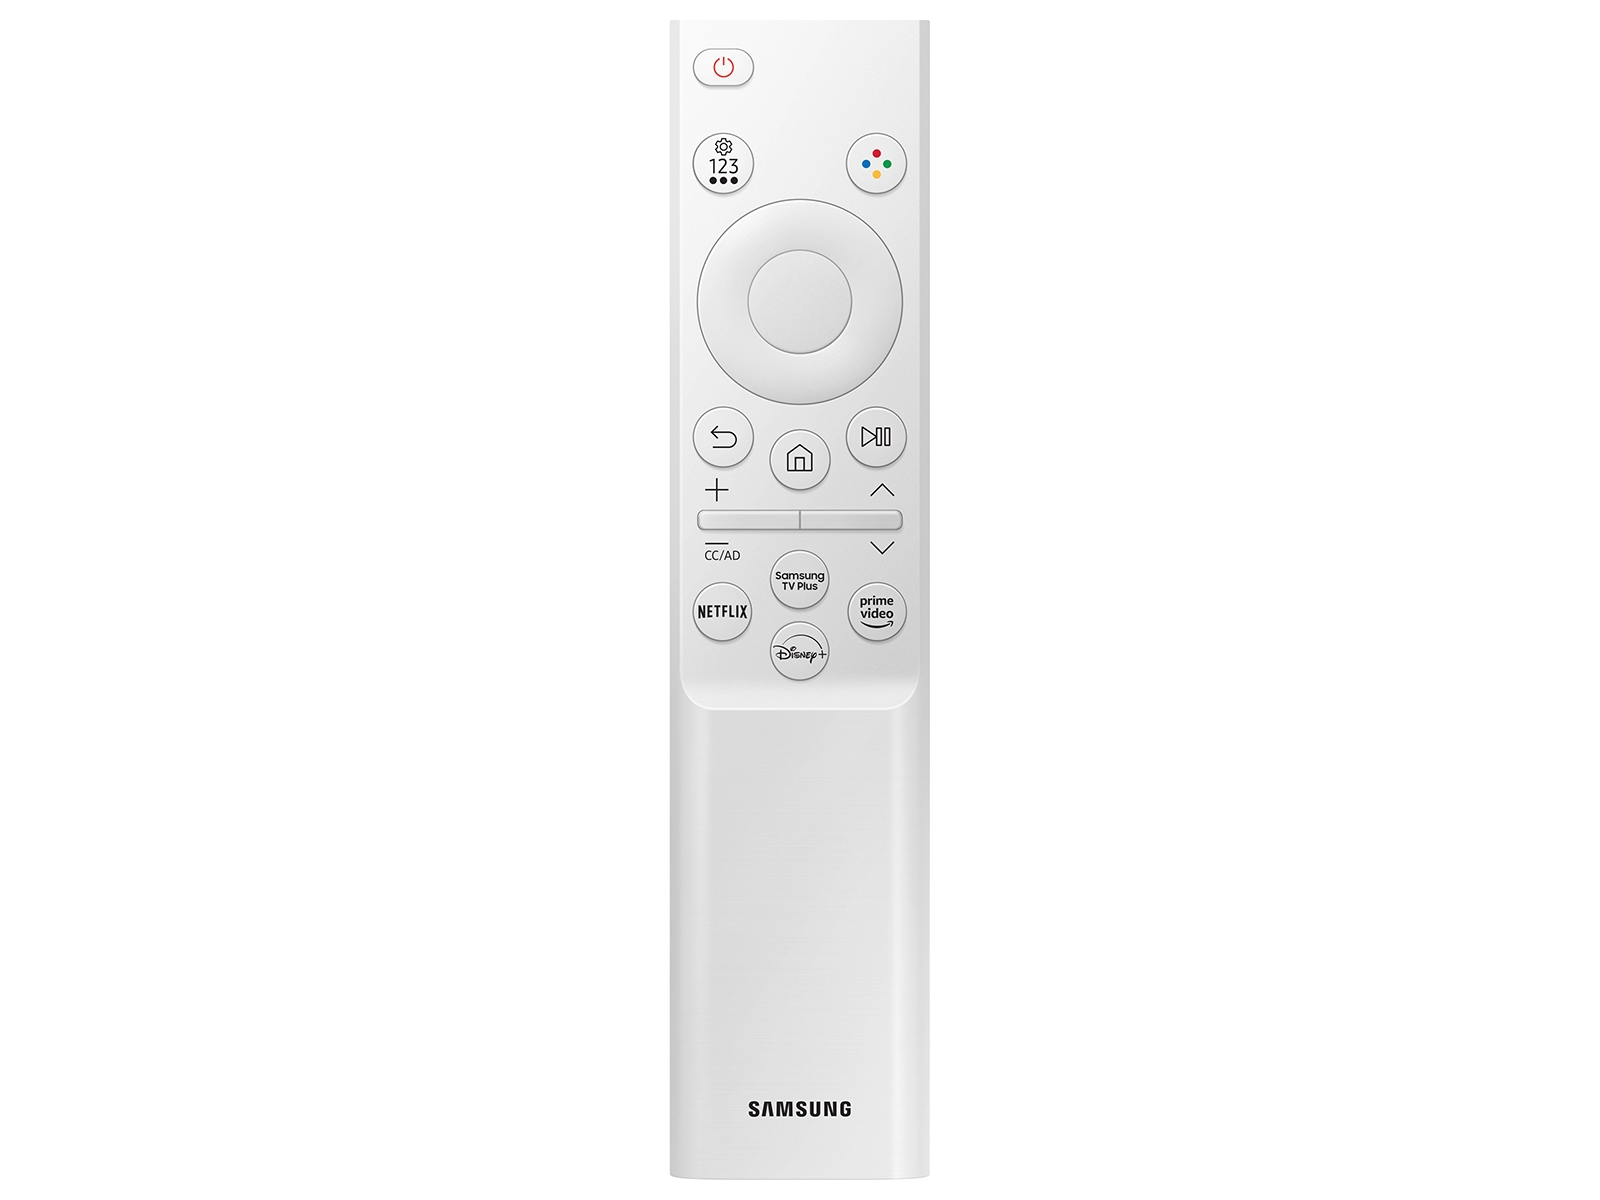 Samsung M50C 27 FHD Smart Tizen Monitor with Streaming TV, HDR10, Built-in  Speakers (HDMI, USB) White LS27CM501ENXZA - Best Buy